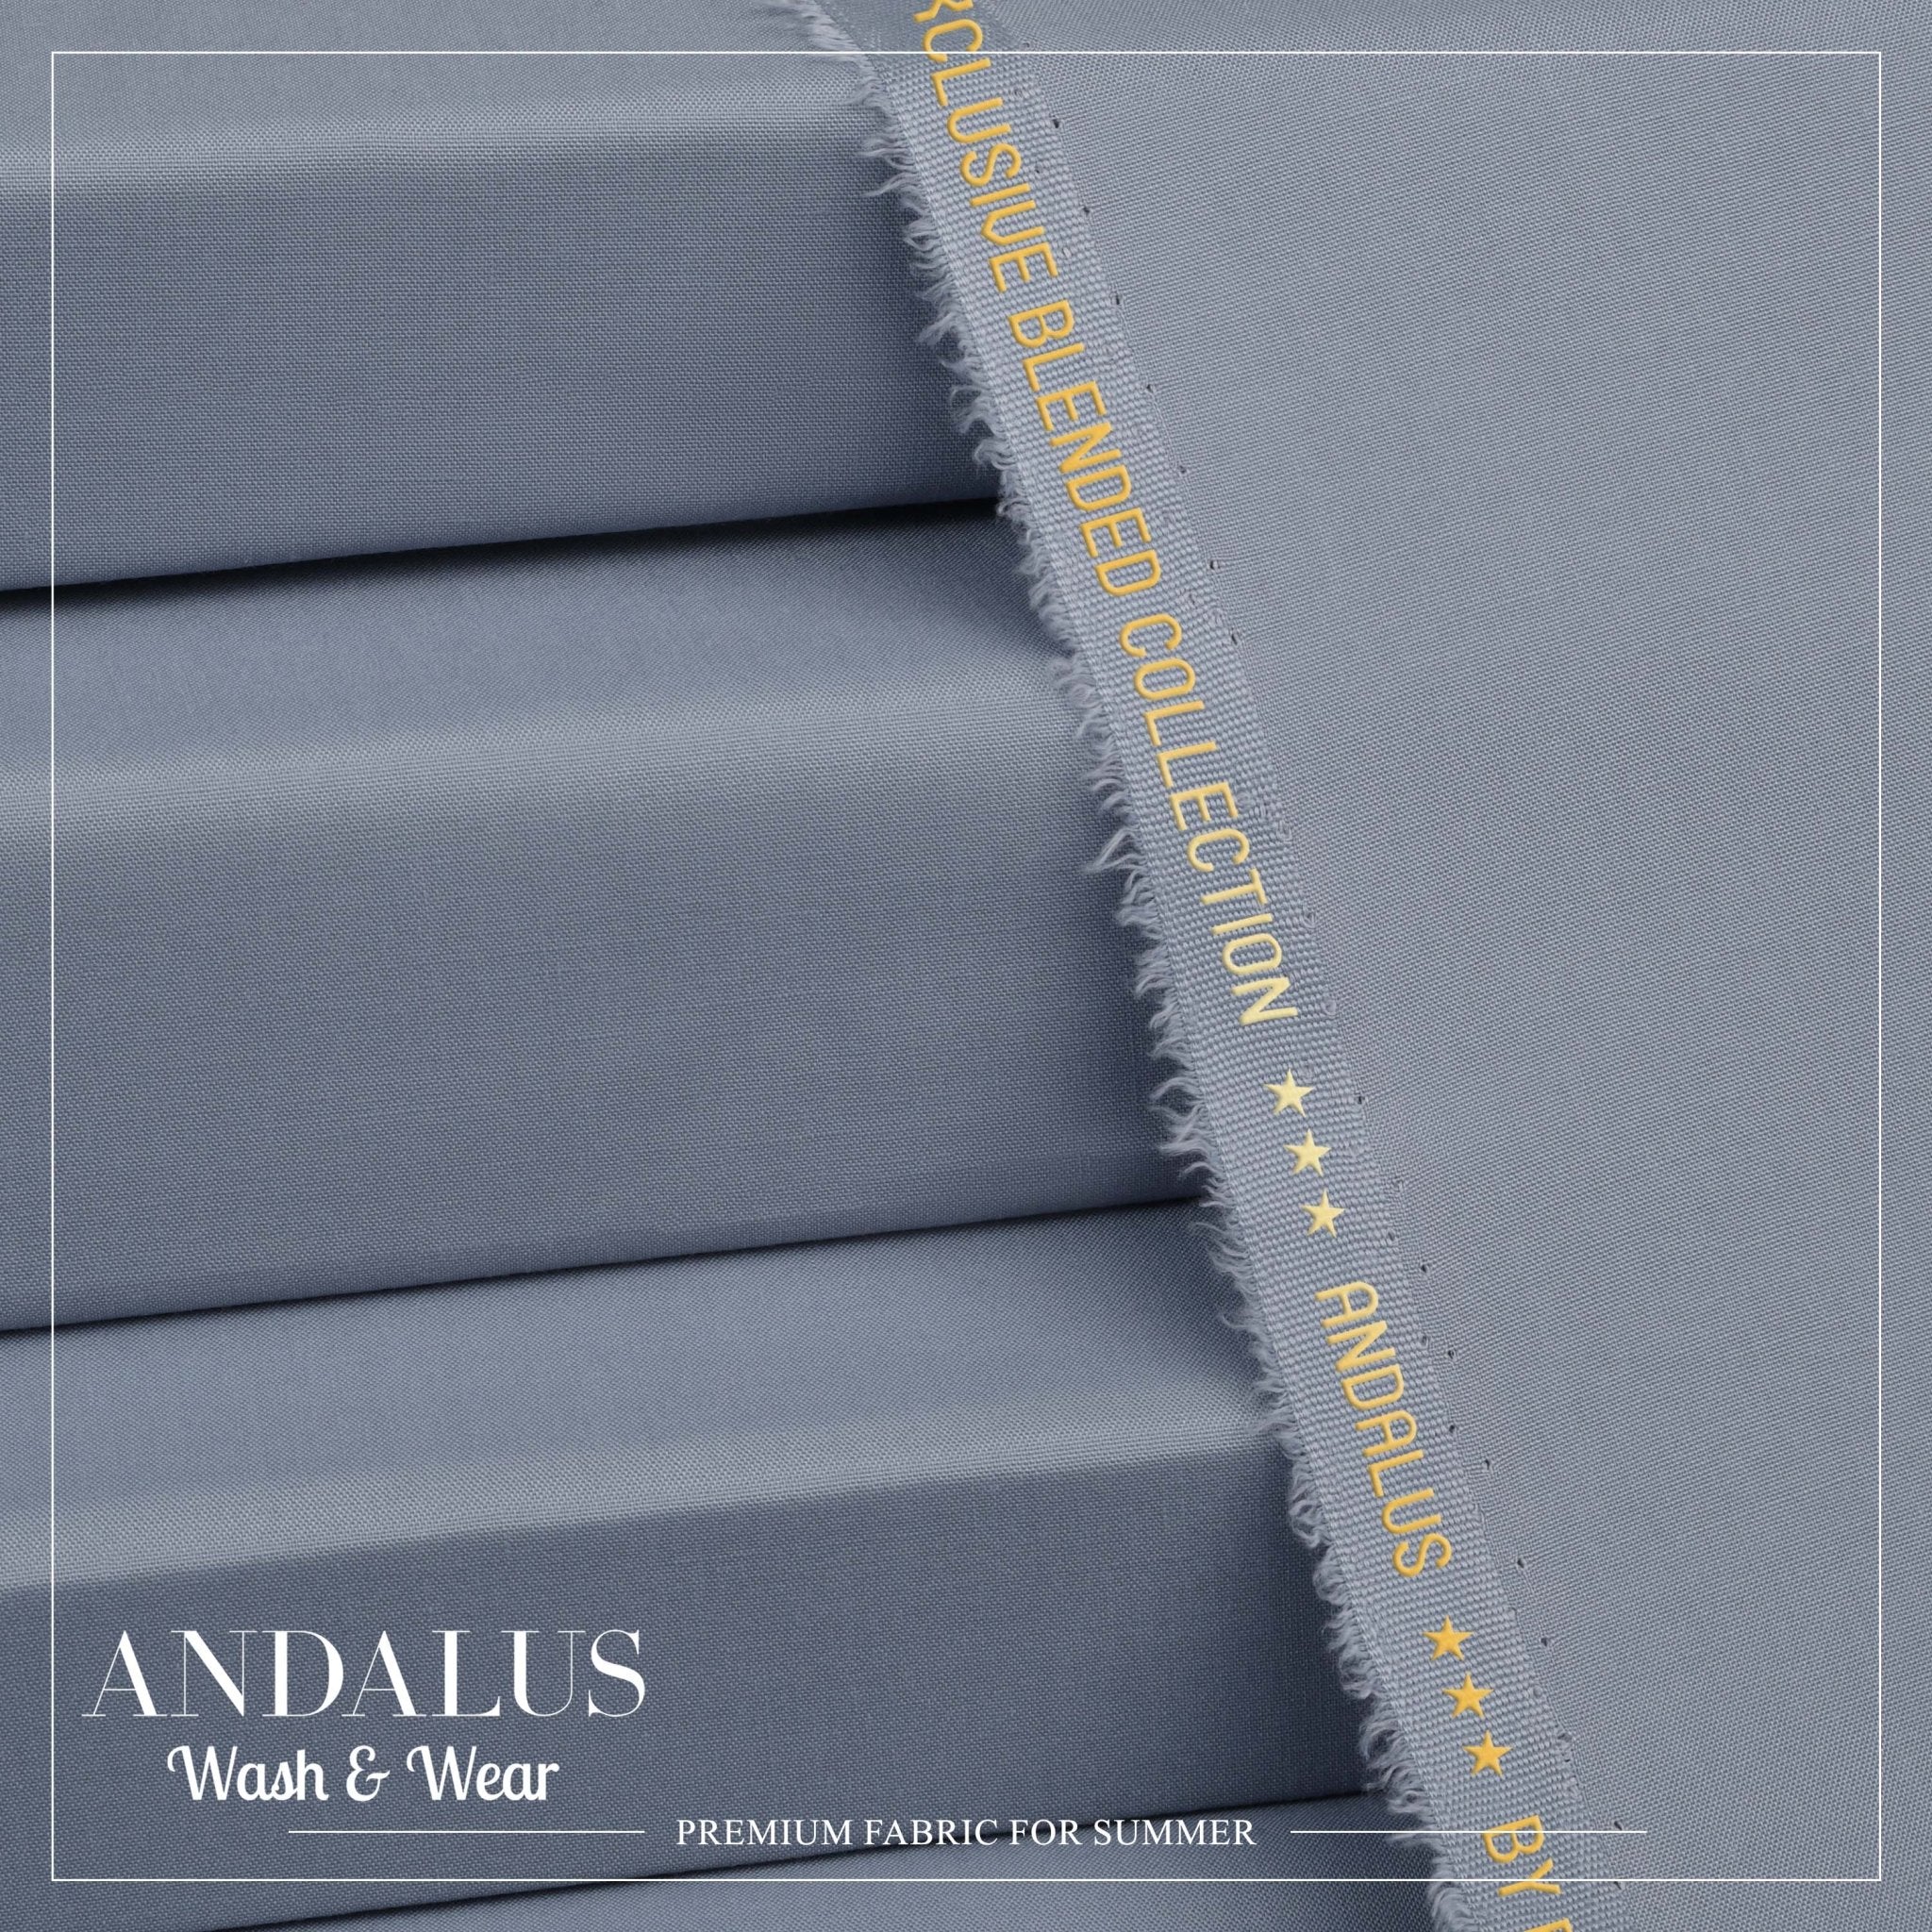 Bluish Gray - Andalus - Wash & Wear Fabric - Faateh Store